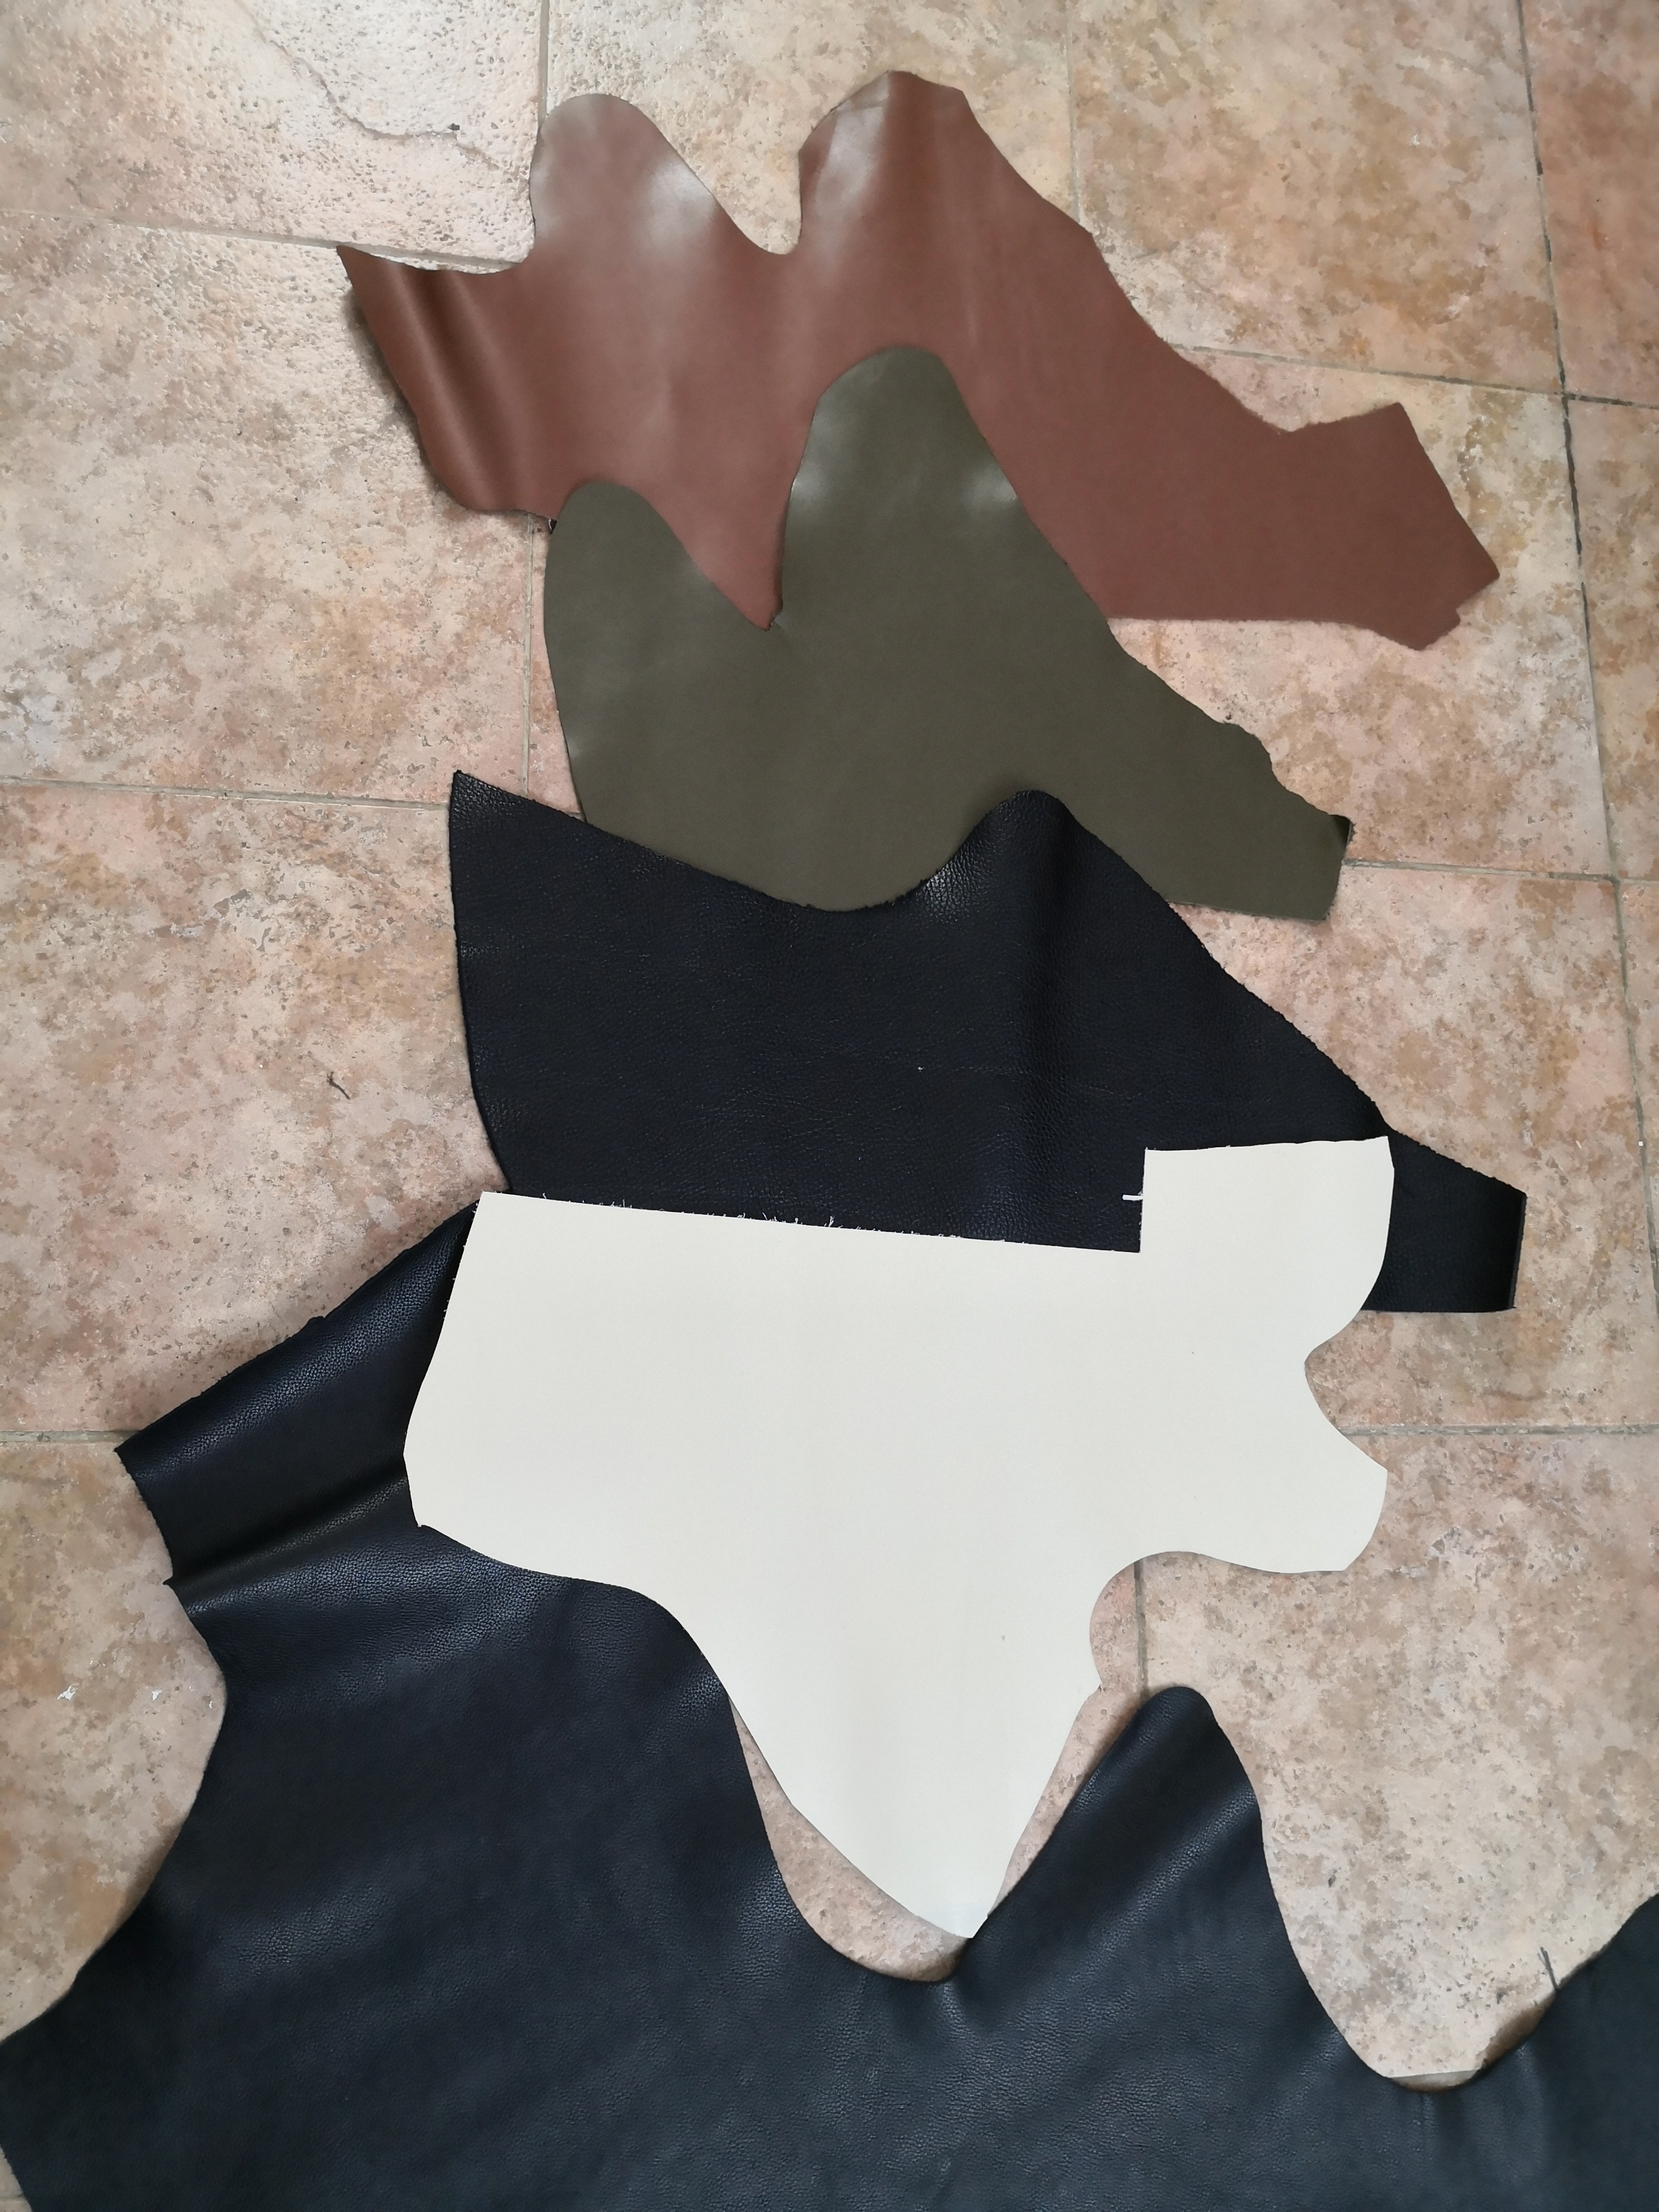 finished leather scrap